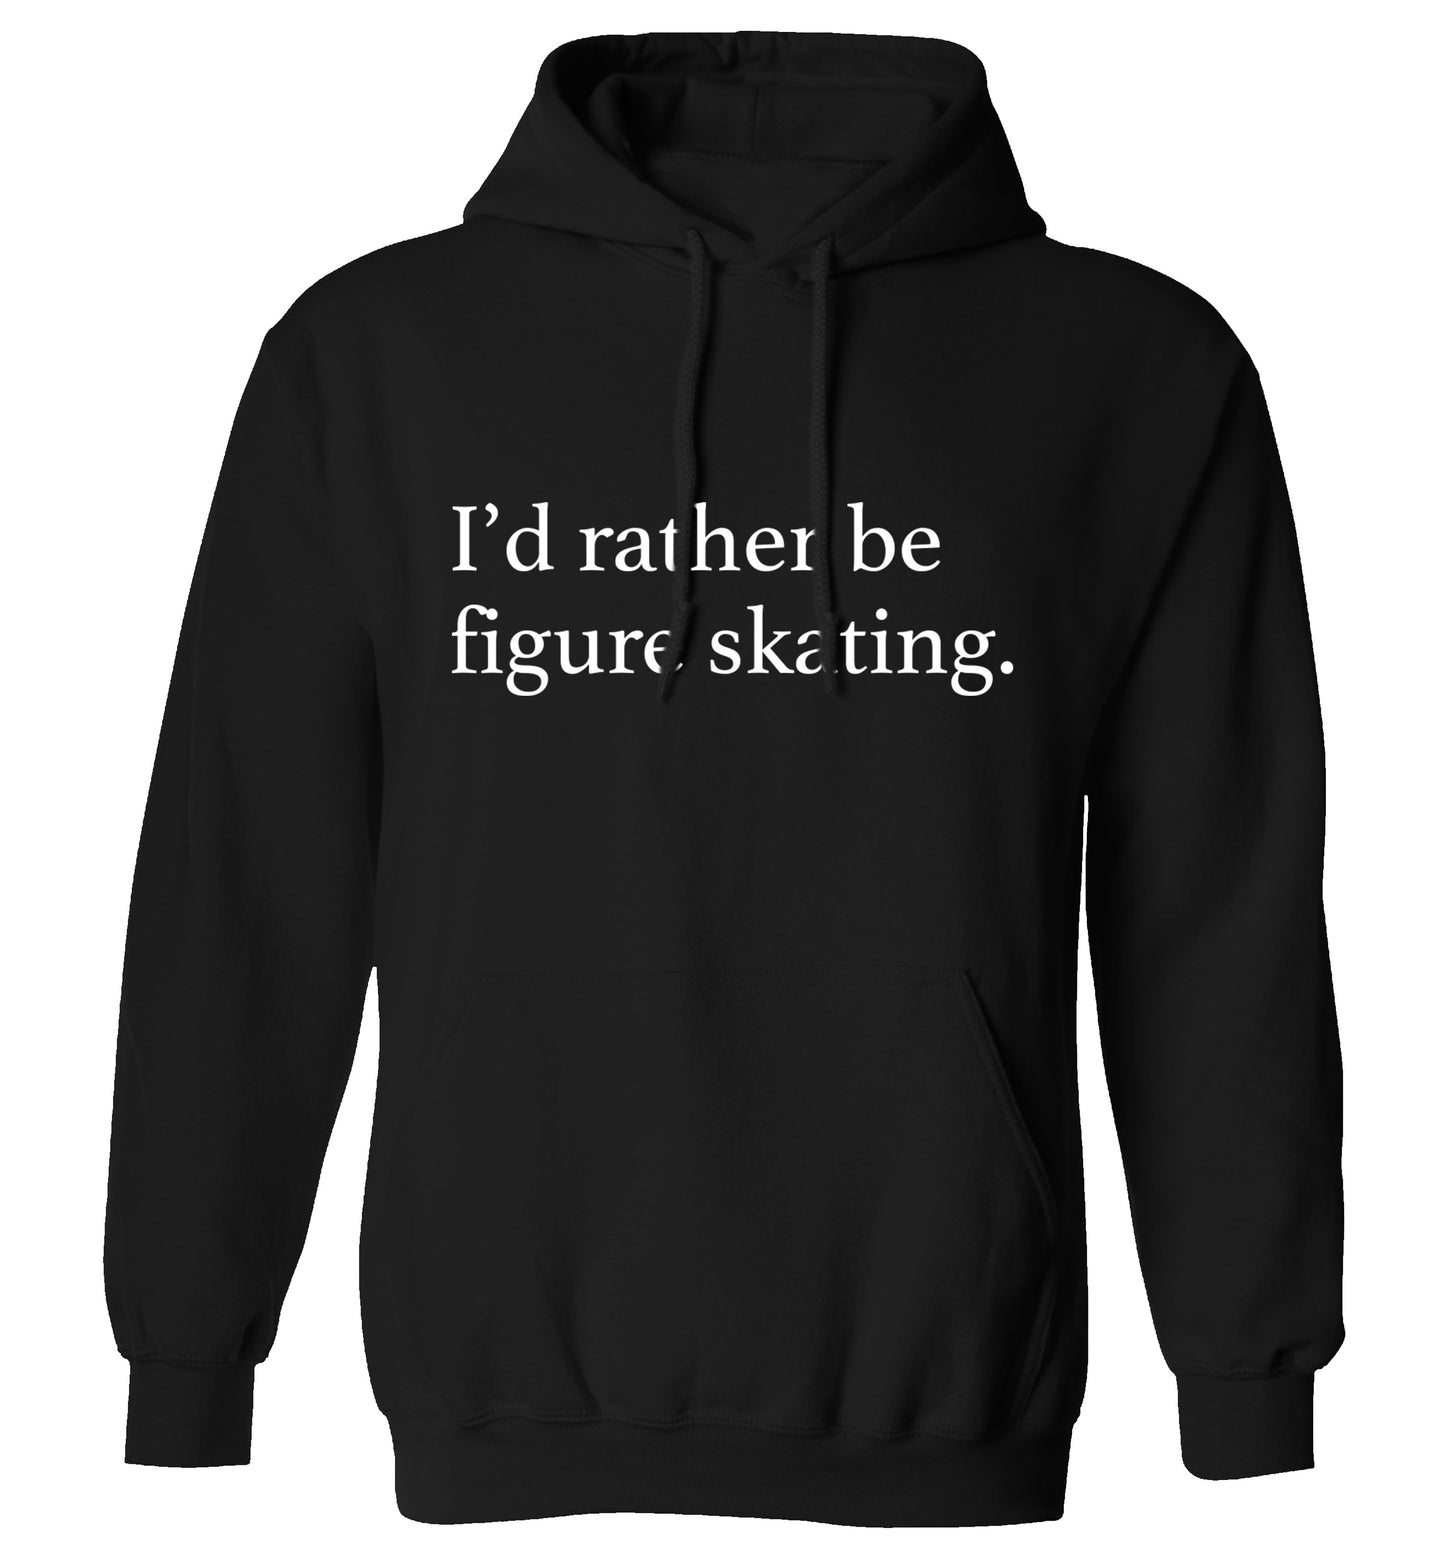 I'd rather be figure skating adults unisexblack hoodie 2XL